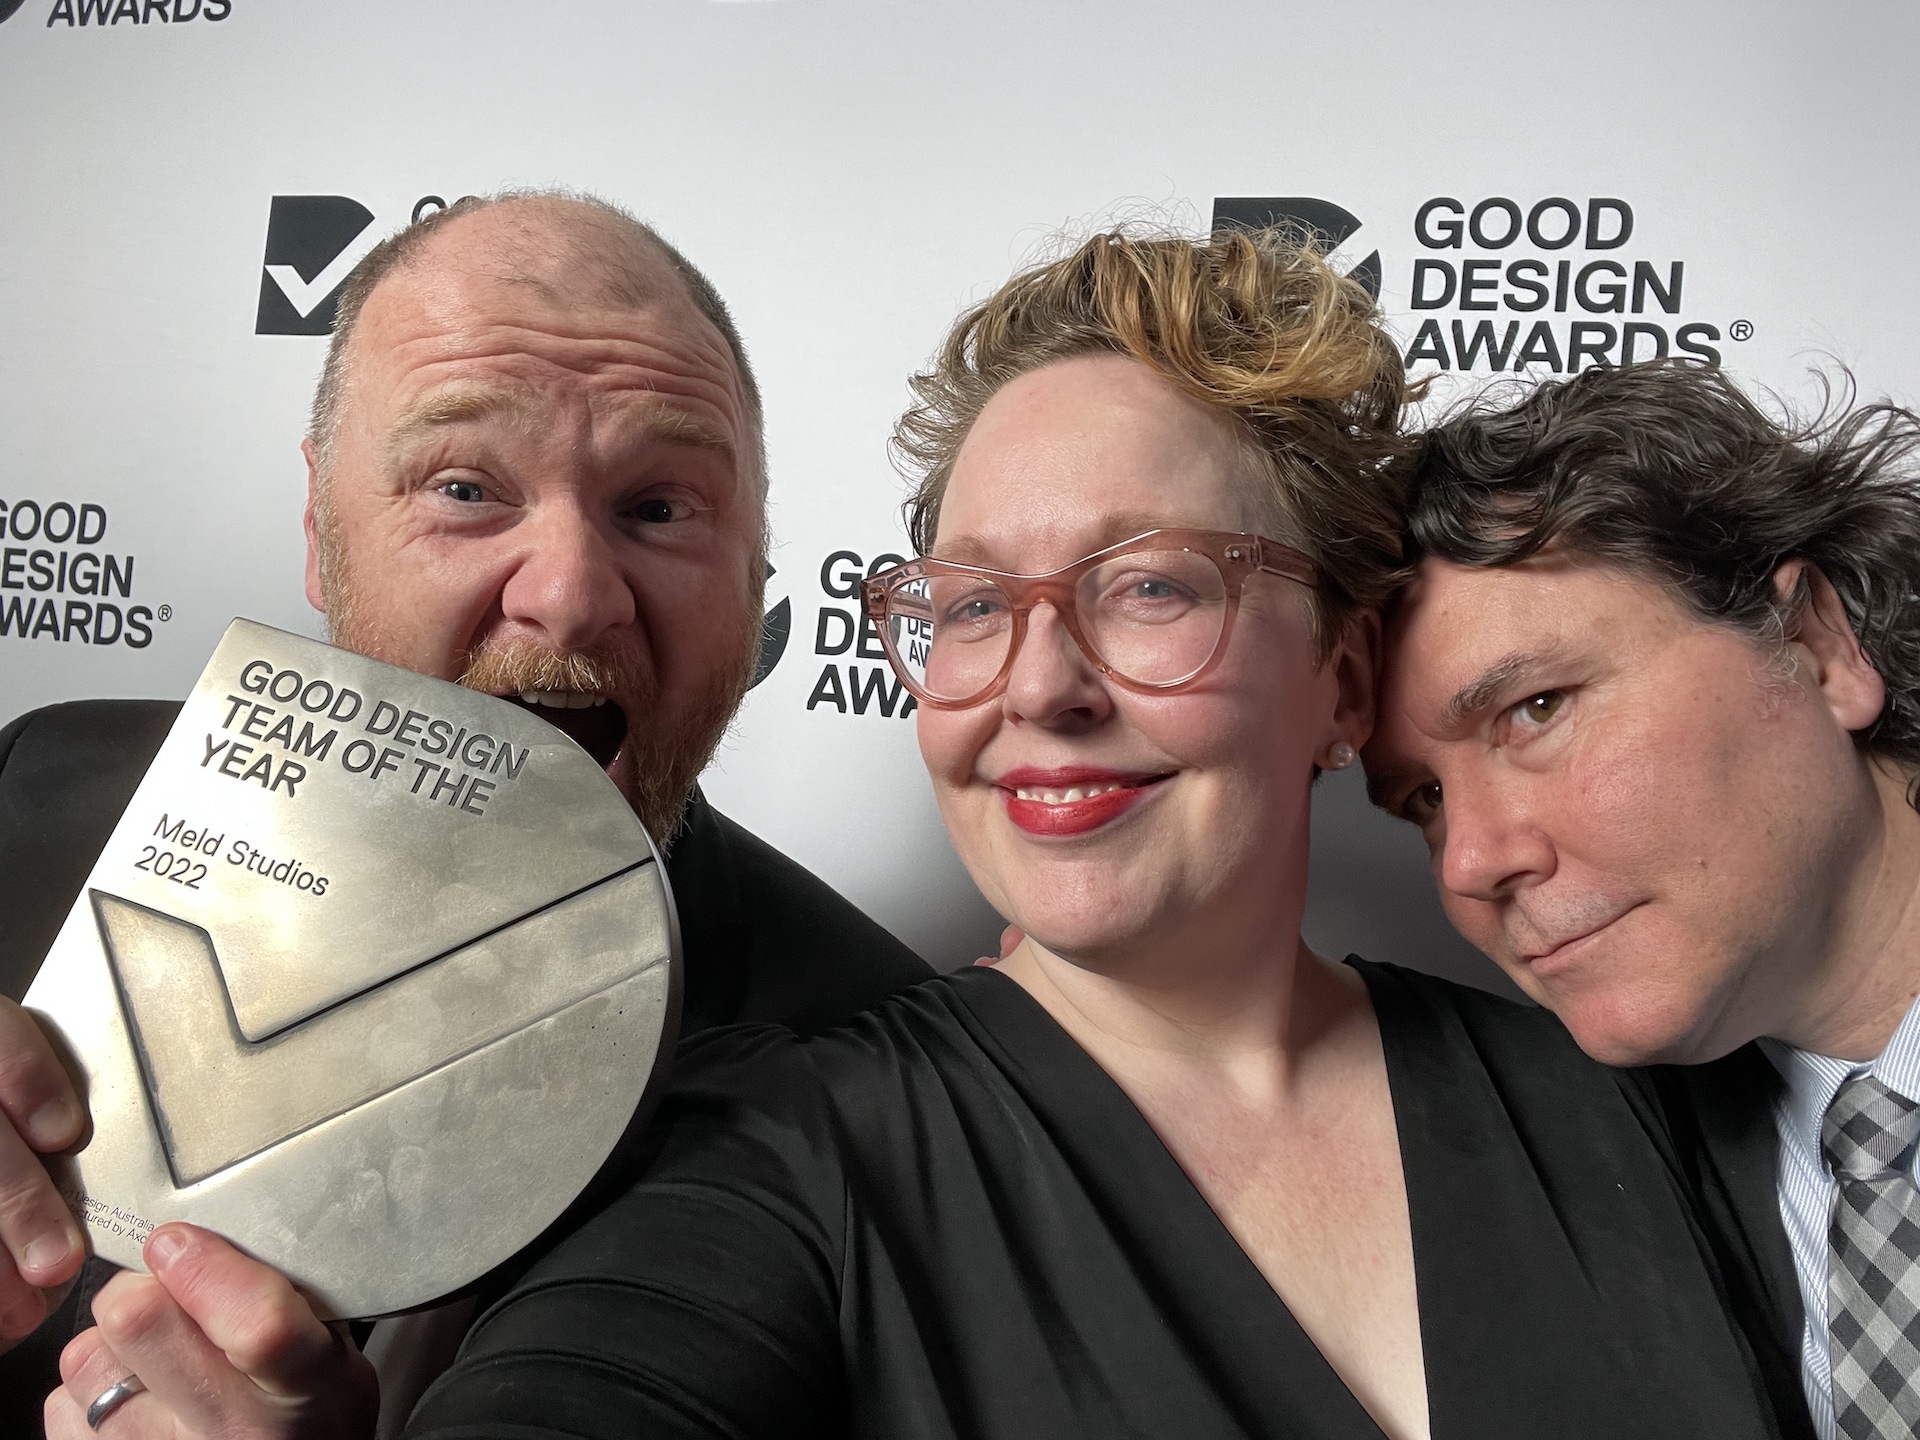 Meld Studios recognised with Good Design Awards 2022 Design Team of the Year